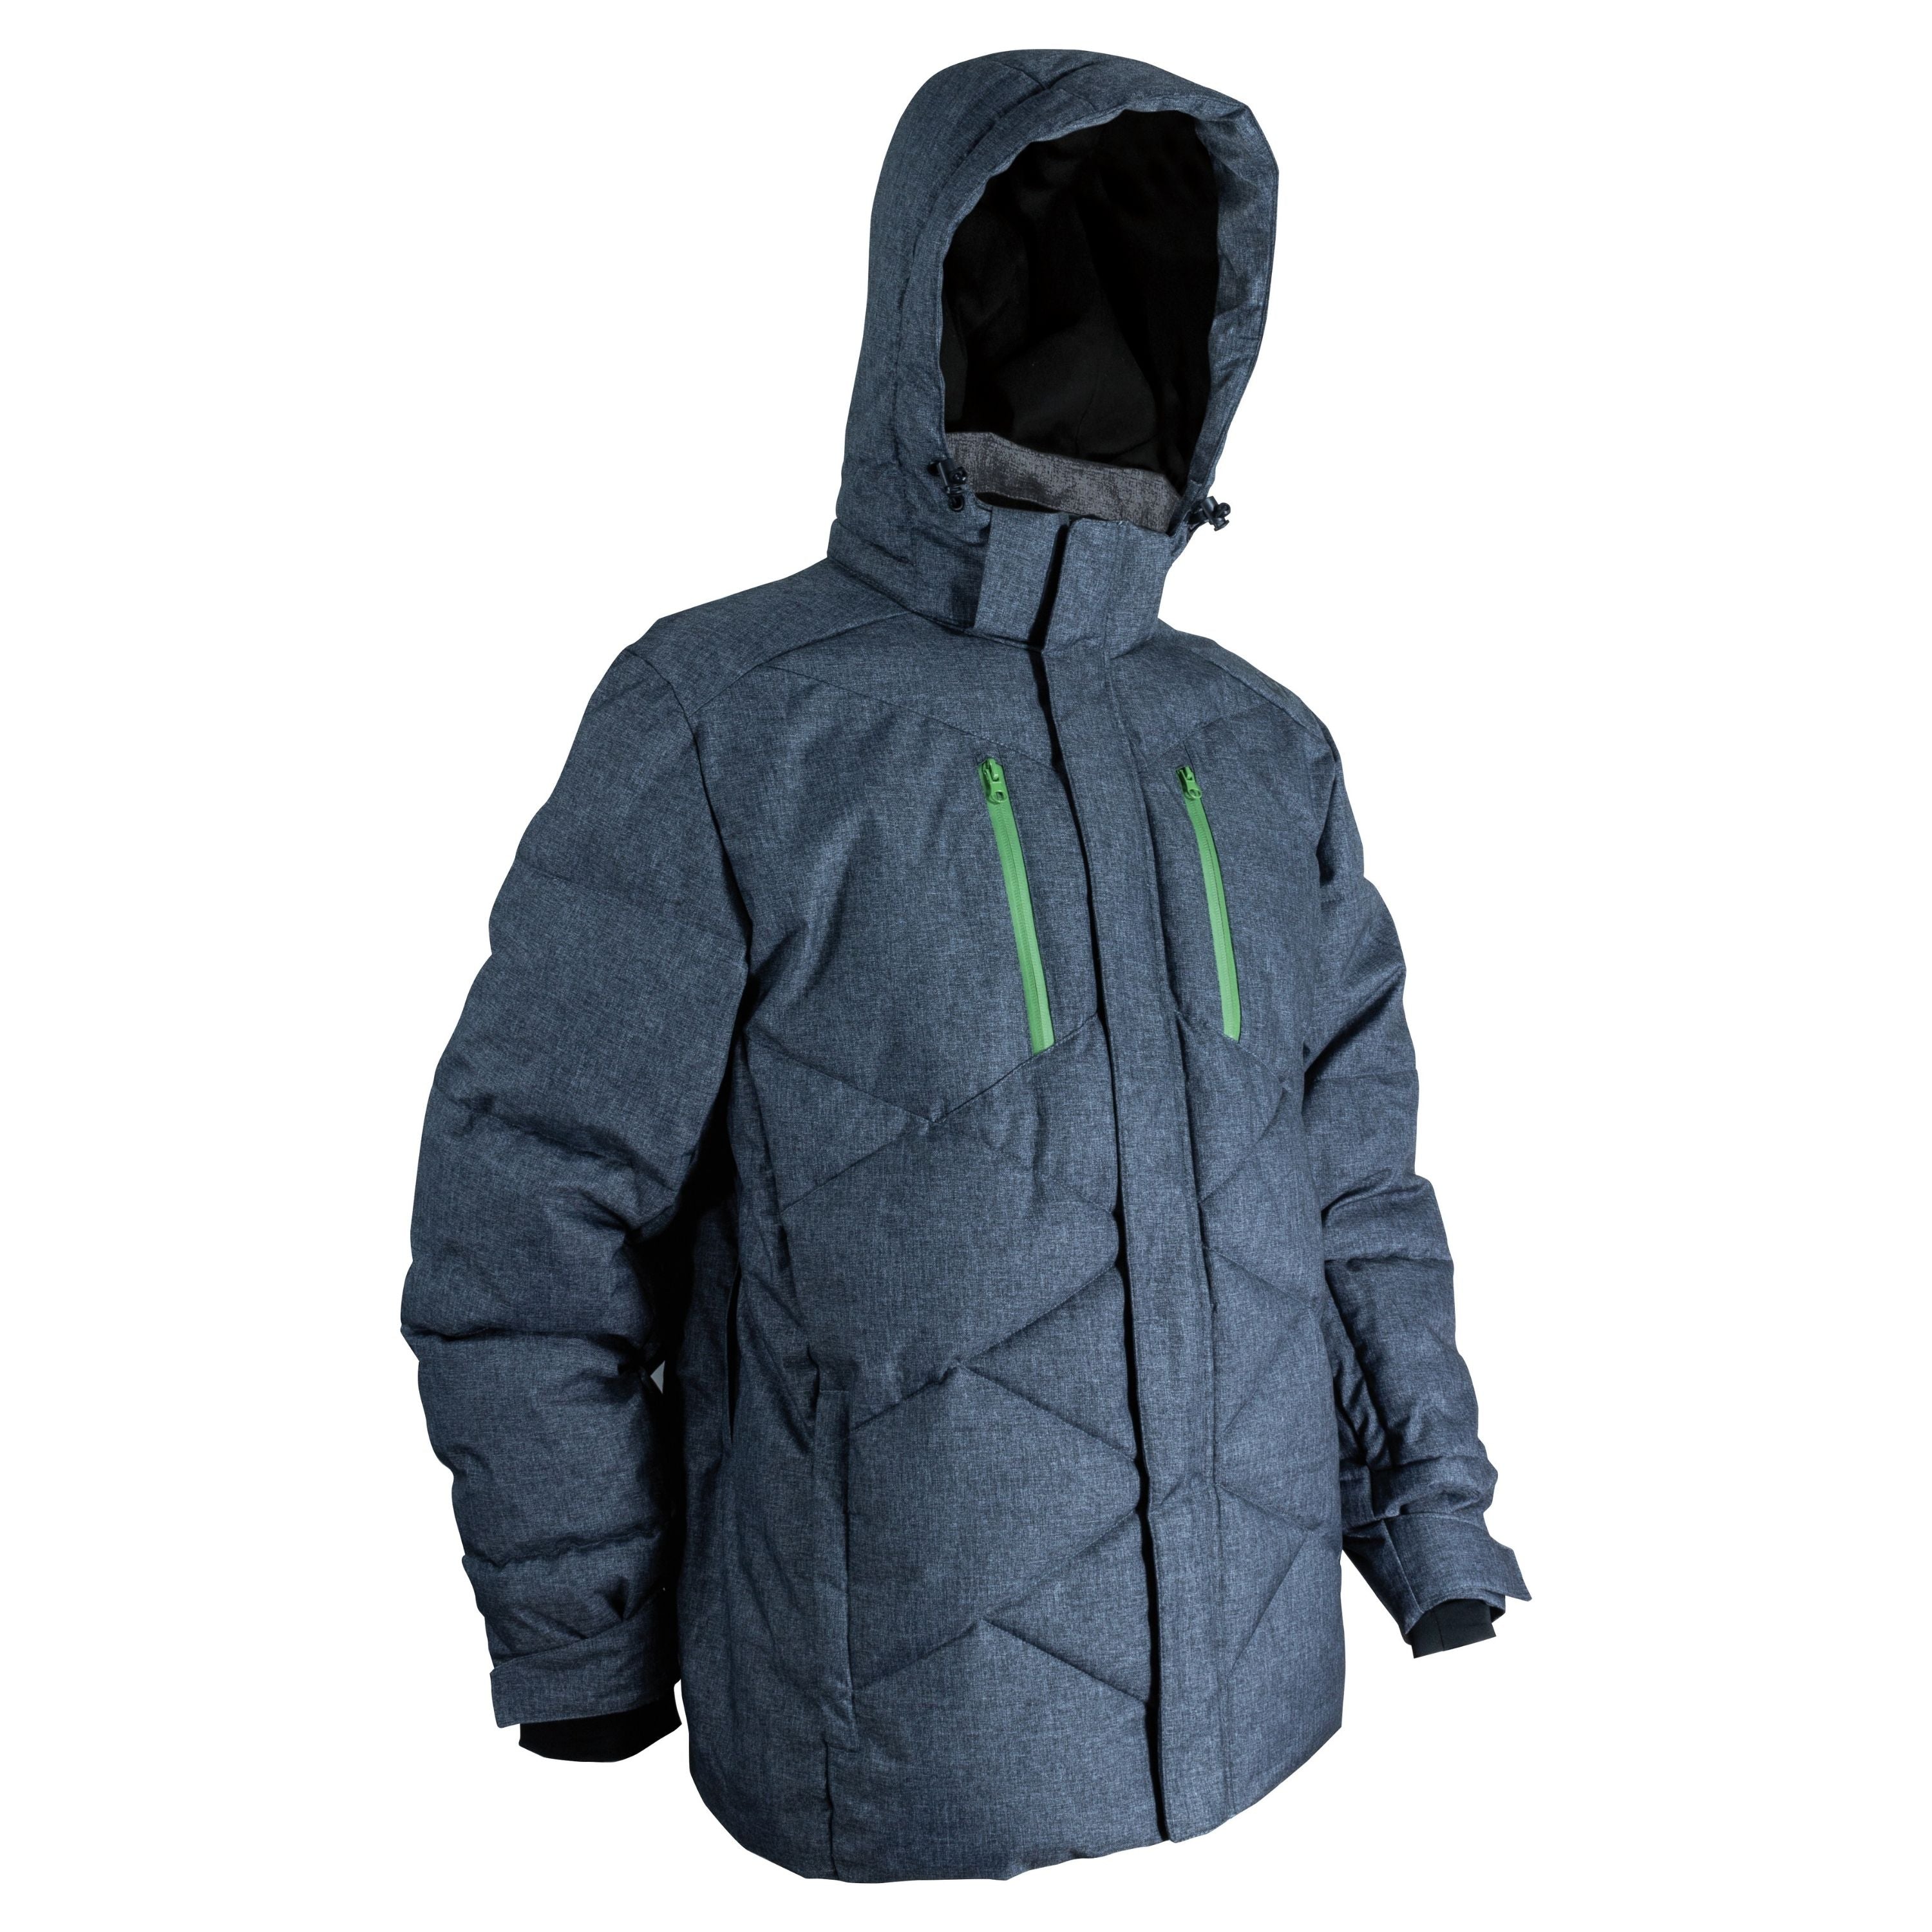 "Grand lux" insulated winter jacket - Men’s